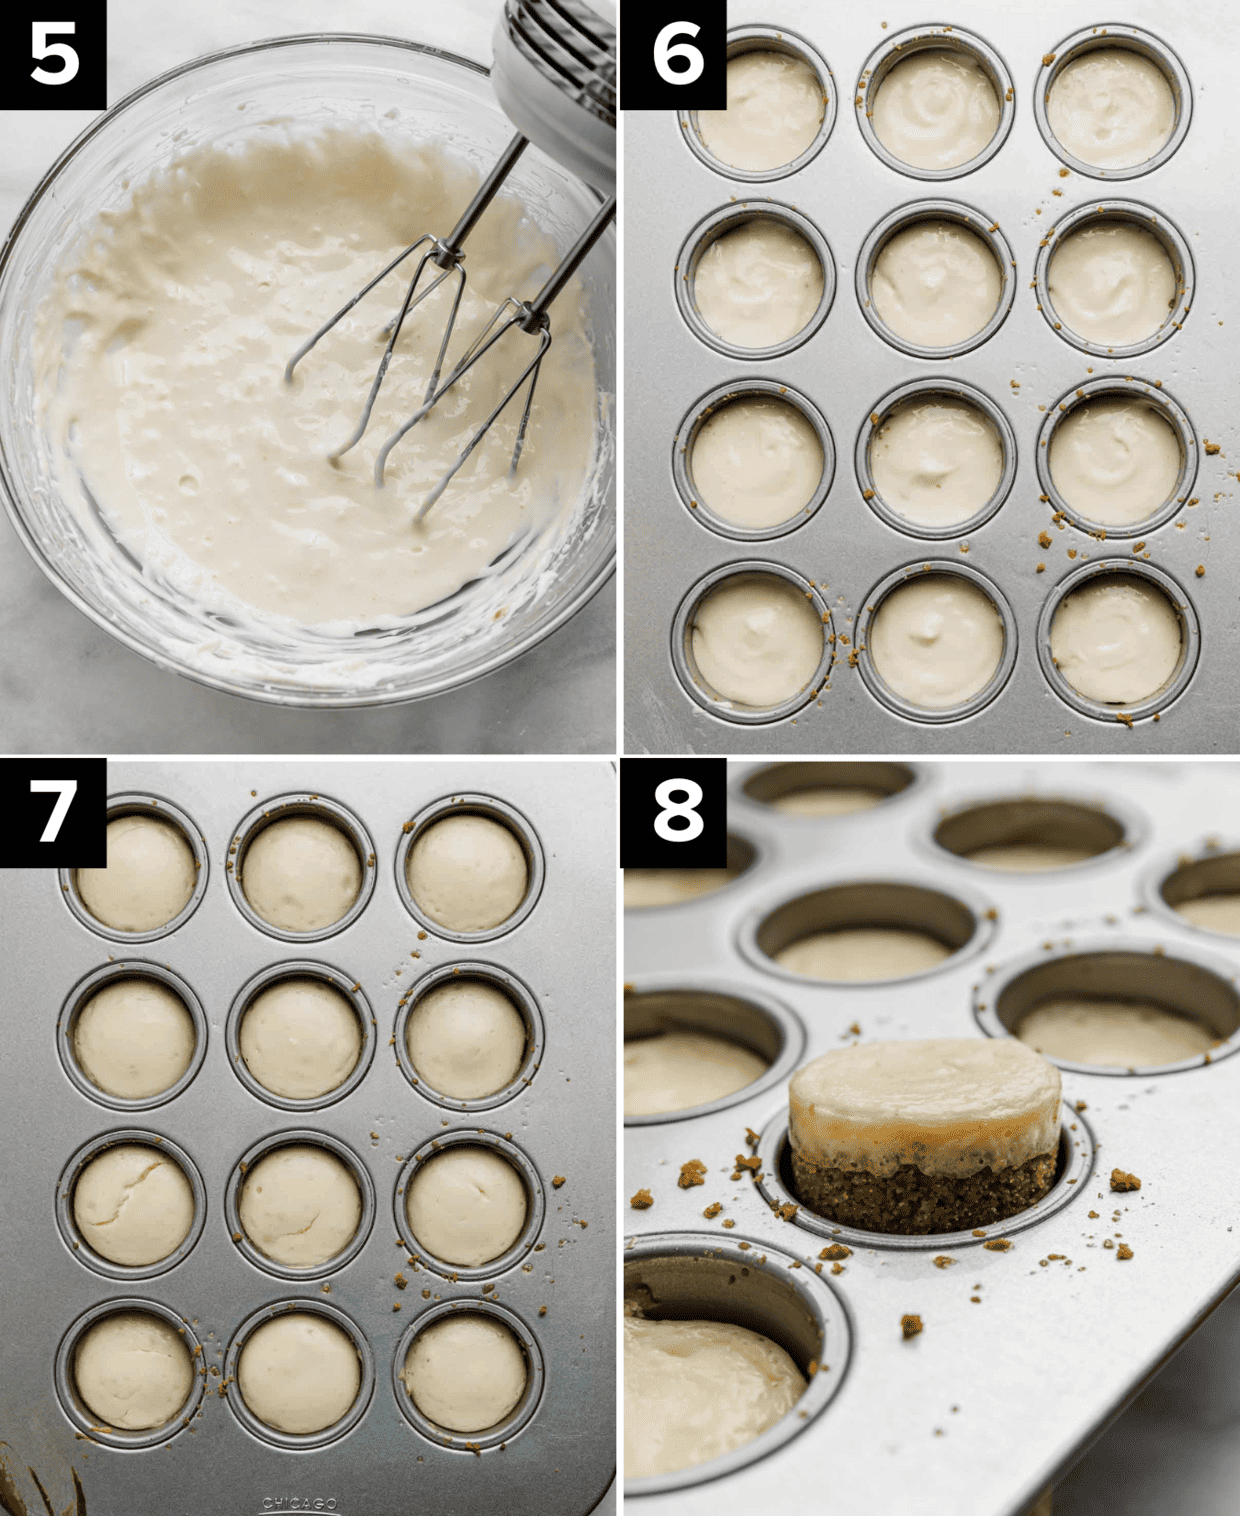 Four photos, top left image is cheesecake filling in a glass bowl, top right is unbaked Mini Cheesecakes in a cheesecake pan, bottom photo is baked Mini Cheesecakes in a mini cheesecake pan, and a hand pushing a mini cheesecake from a cheesecake pan.